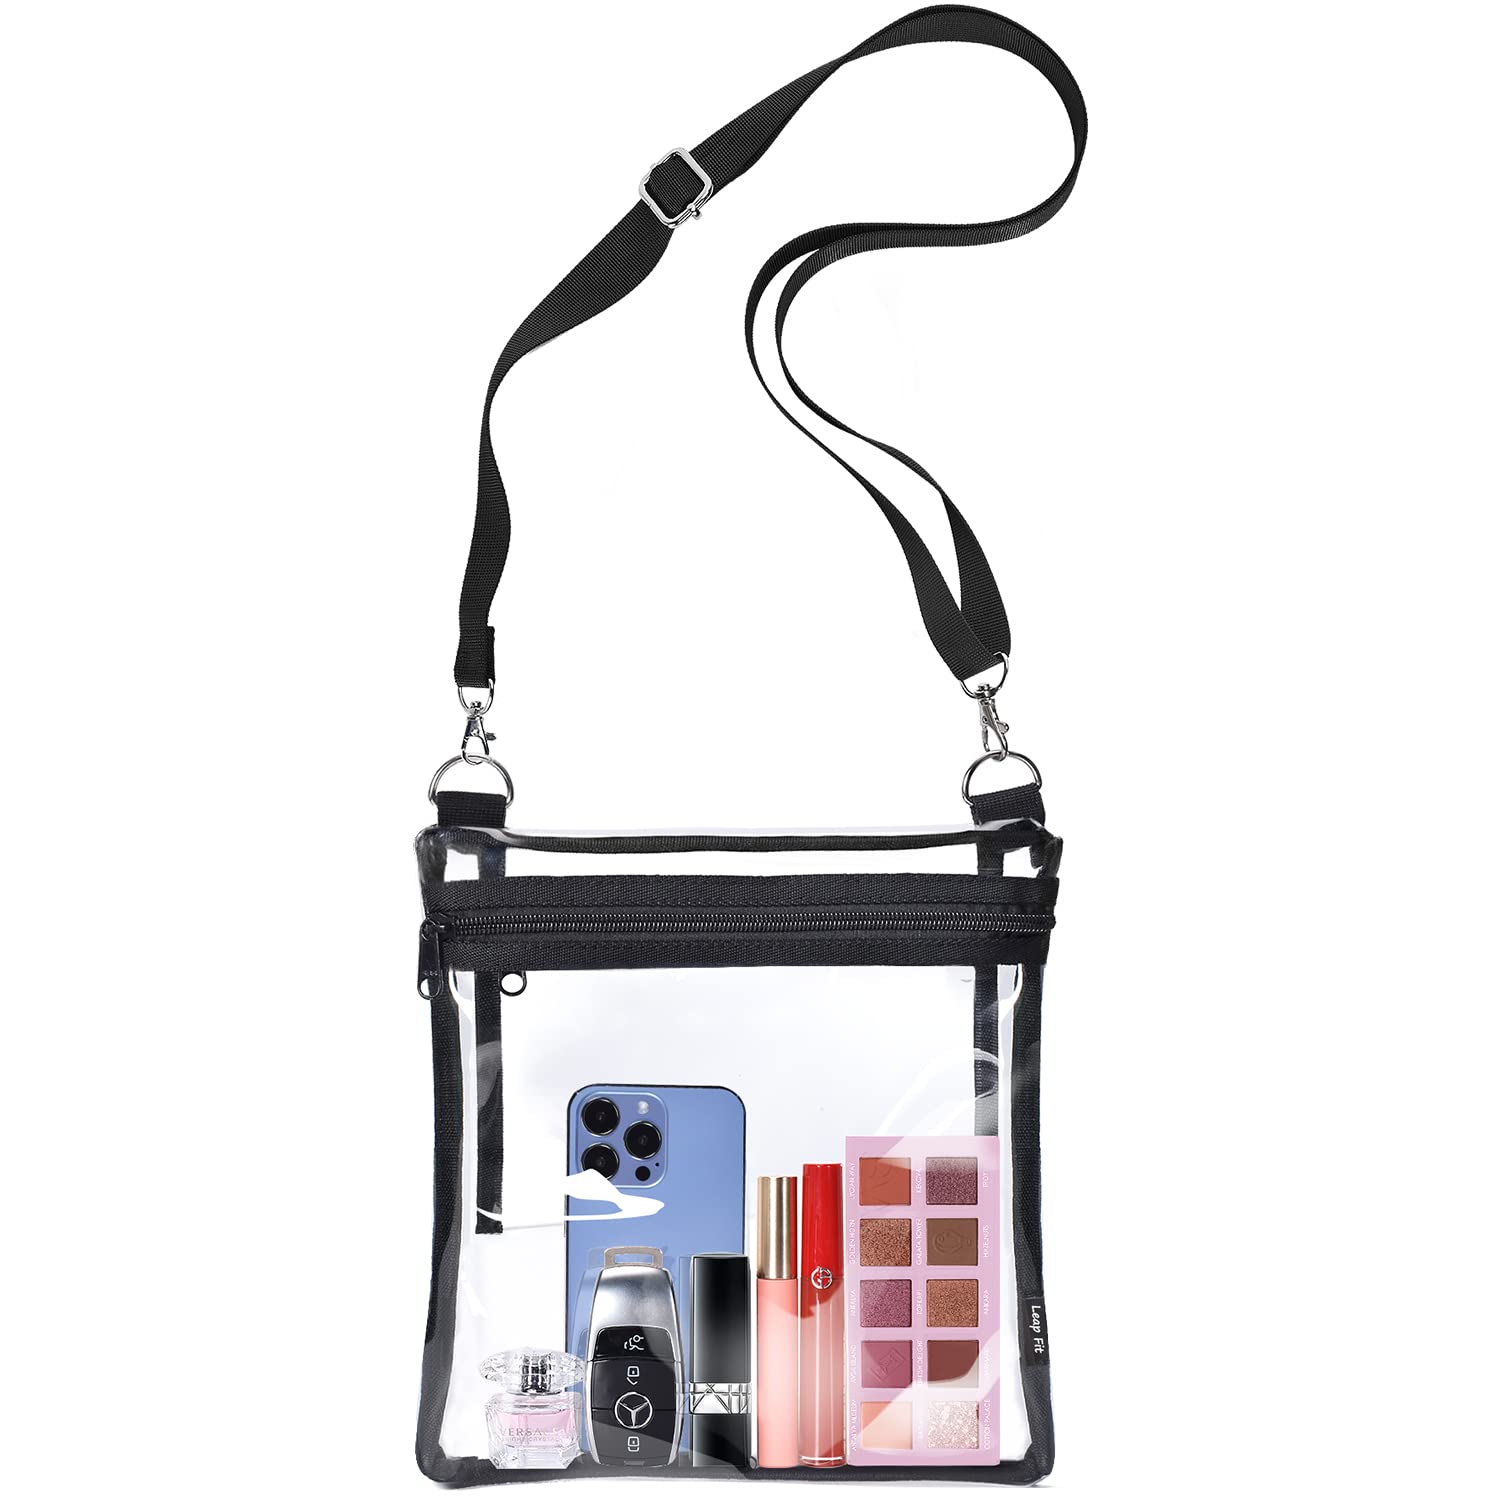 Leap Fit Clear Bag Stadium Approved: See Through Purse Women Men Crossbody Bags - Small Cute Transparent Plastic Purse